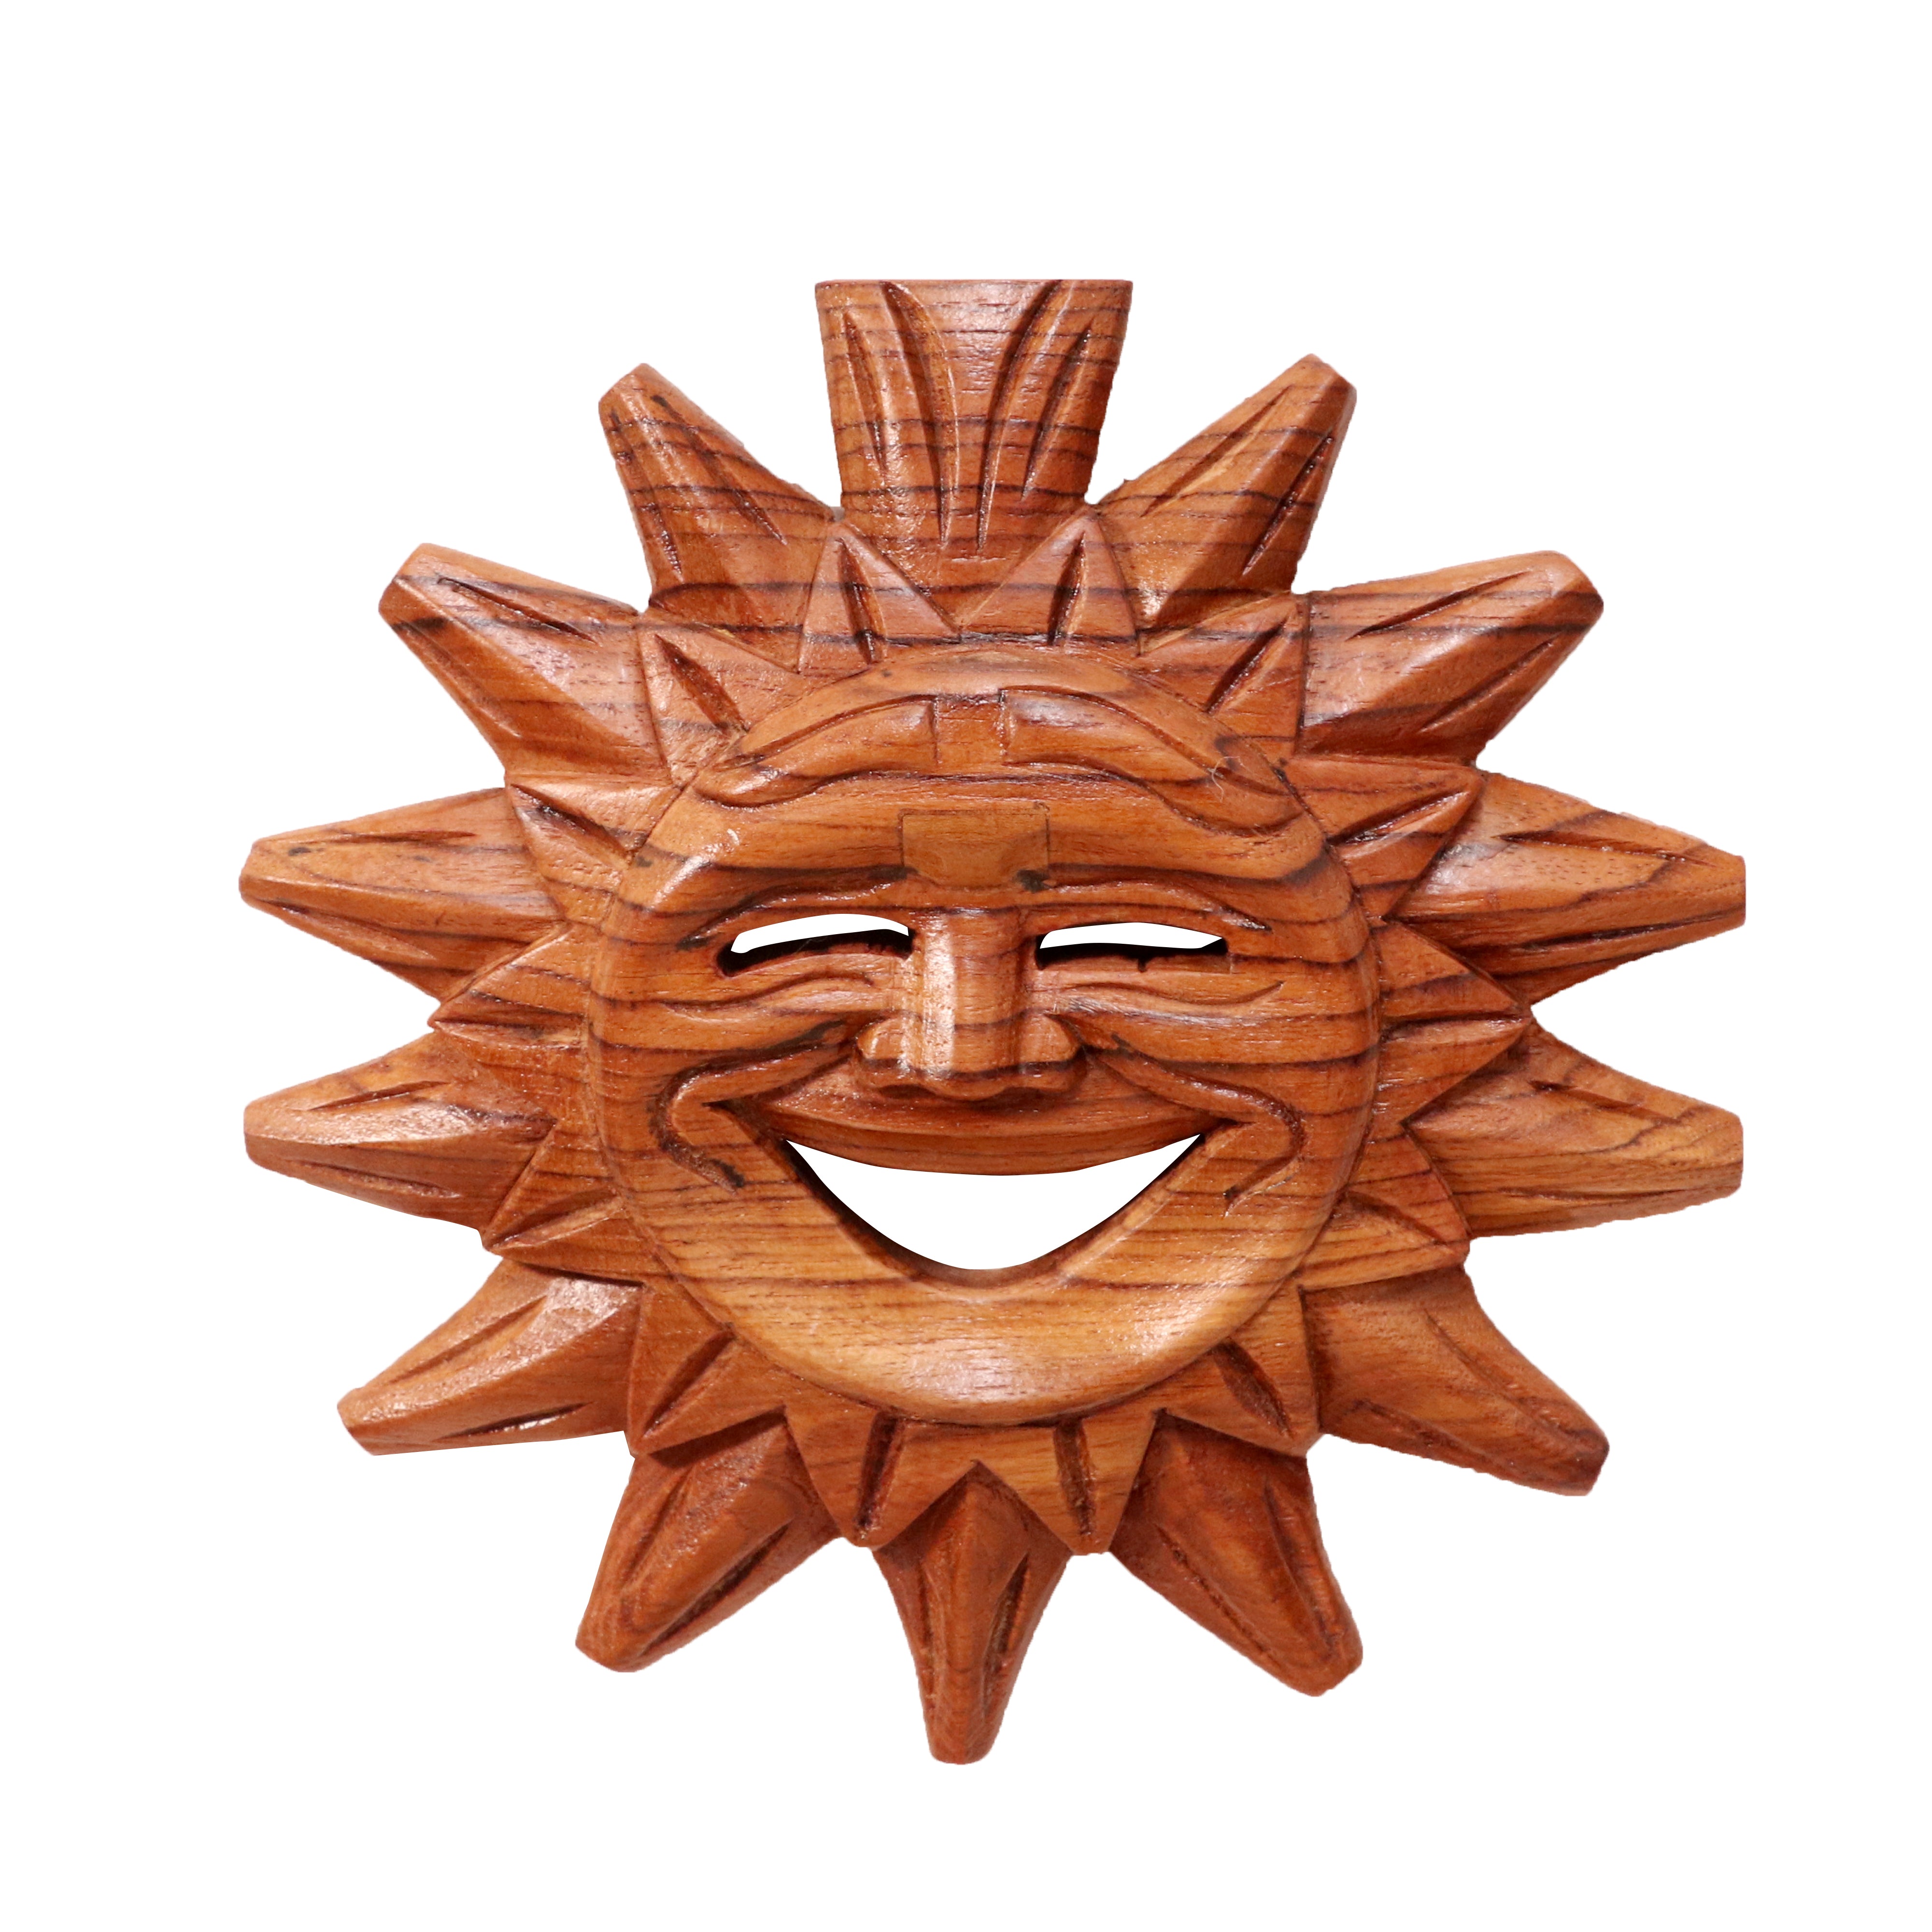 Southern Smiling Sun Style Handmade Antique Wooden Wall Decor for Home Wall Decor